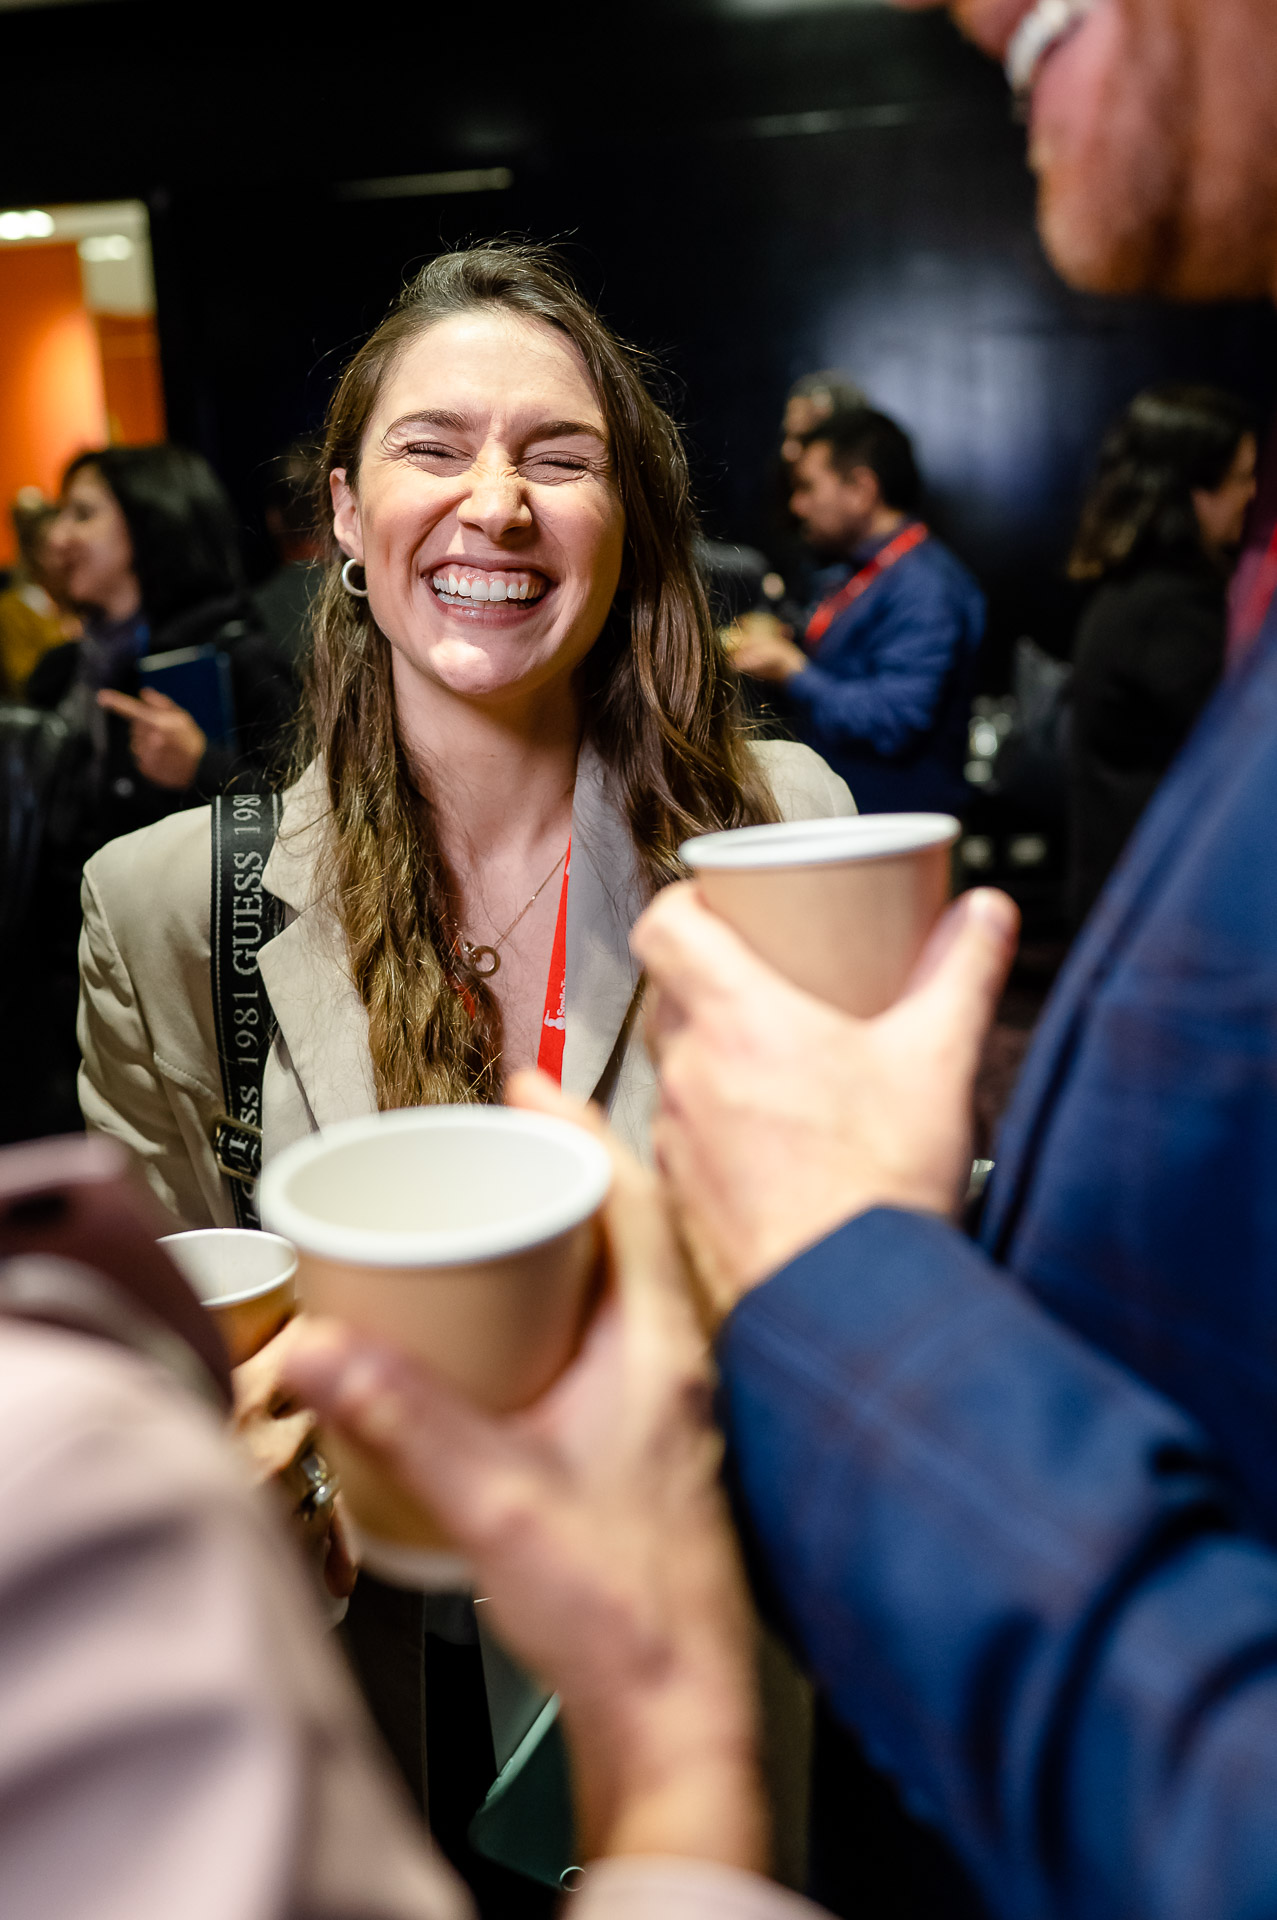 Camile Richards in a crowded room smiling. Two people in the foreground are holding coffee cups and out of focus